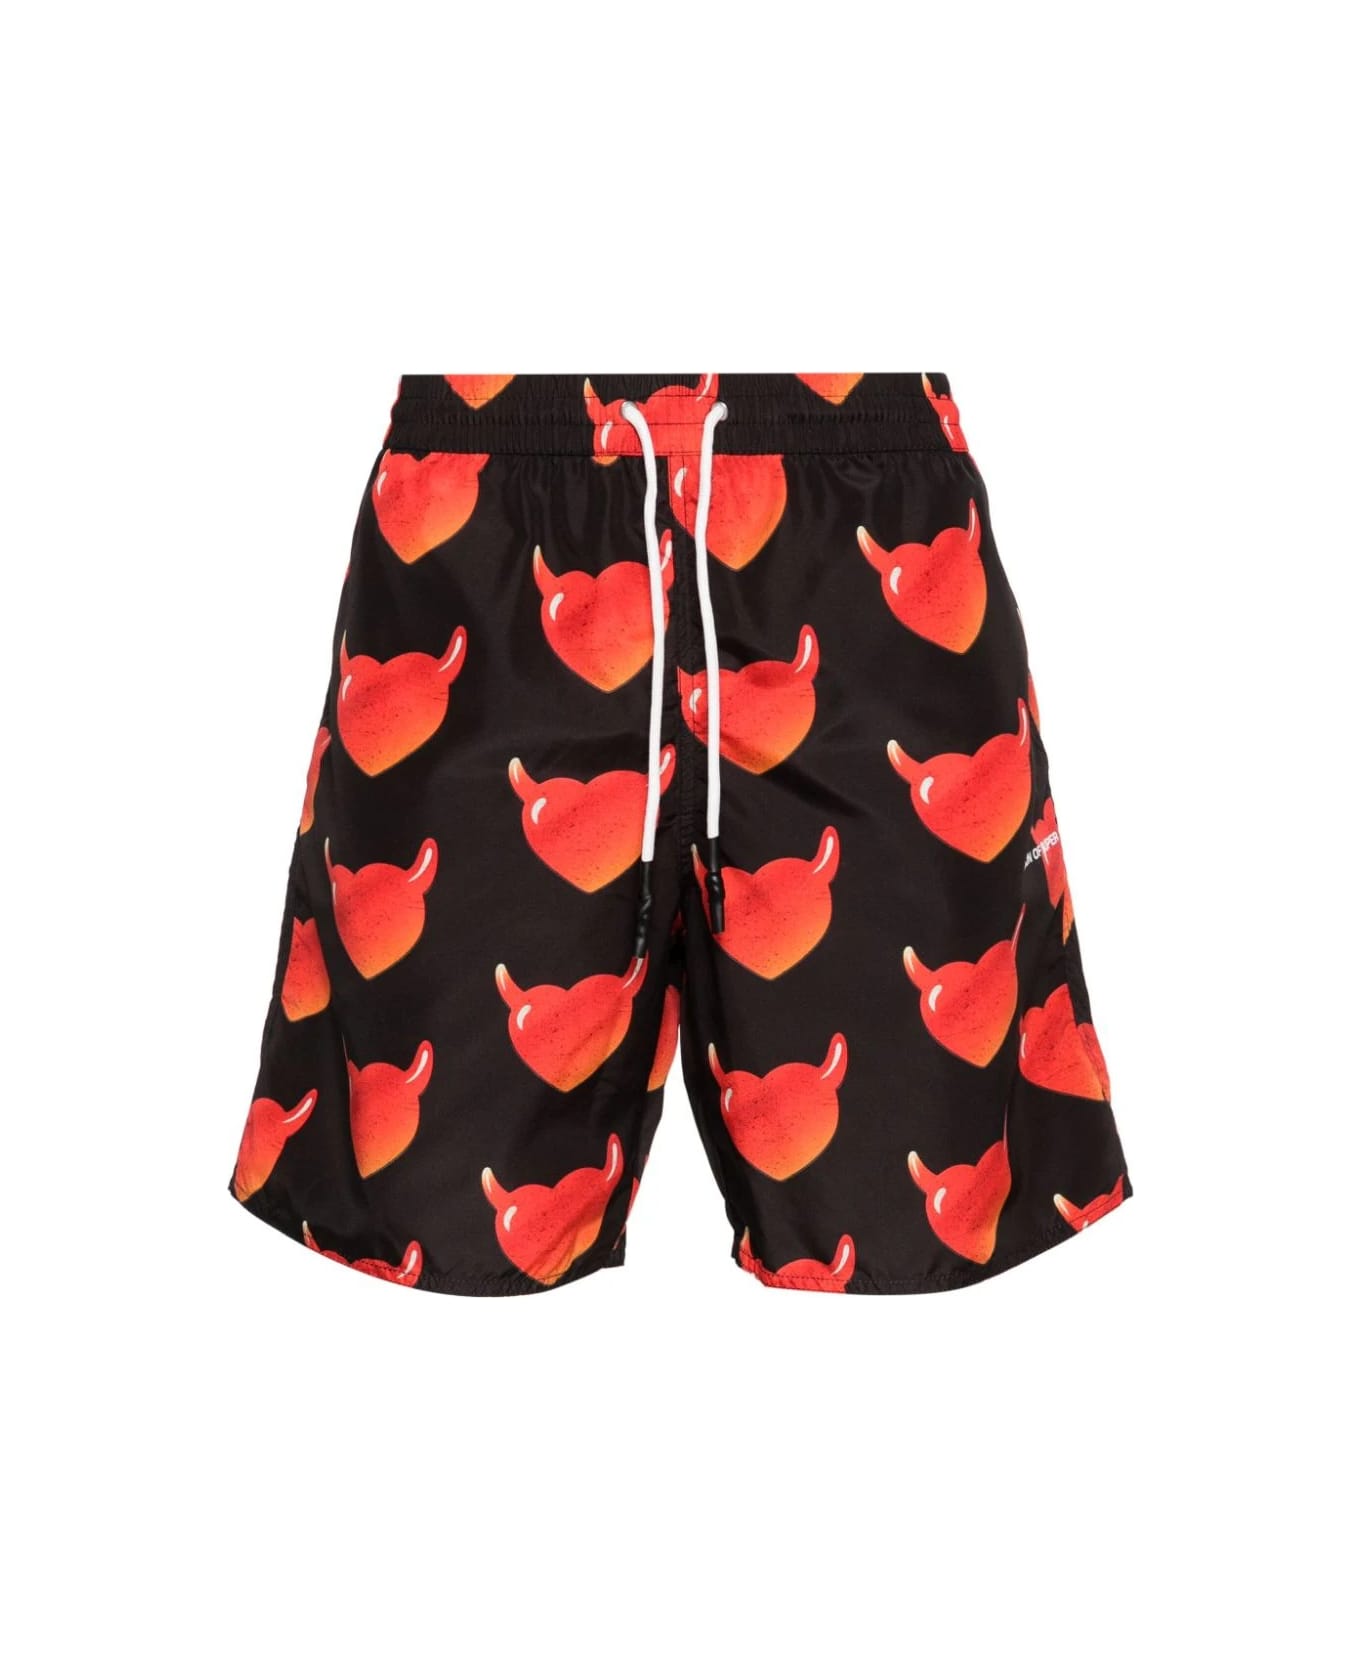 Vision of Super Black Swimwear With All-over Vos Hearts - Black